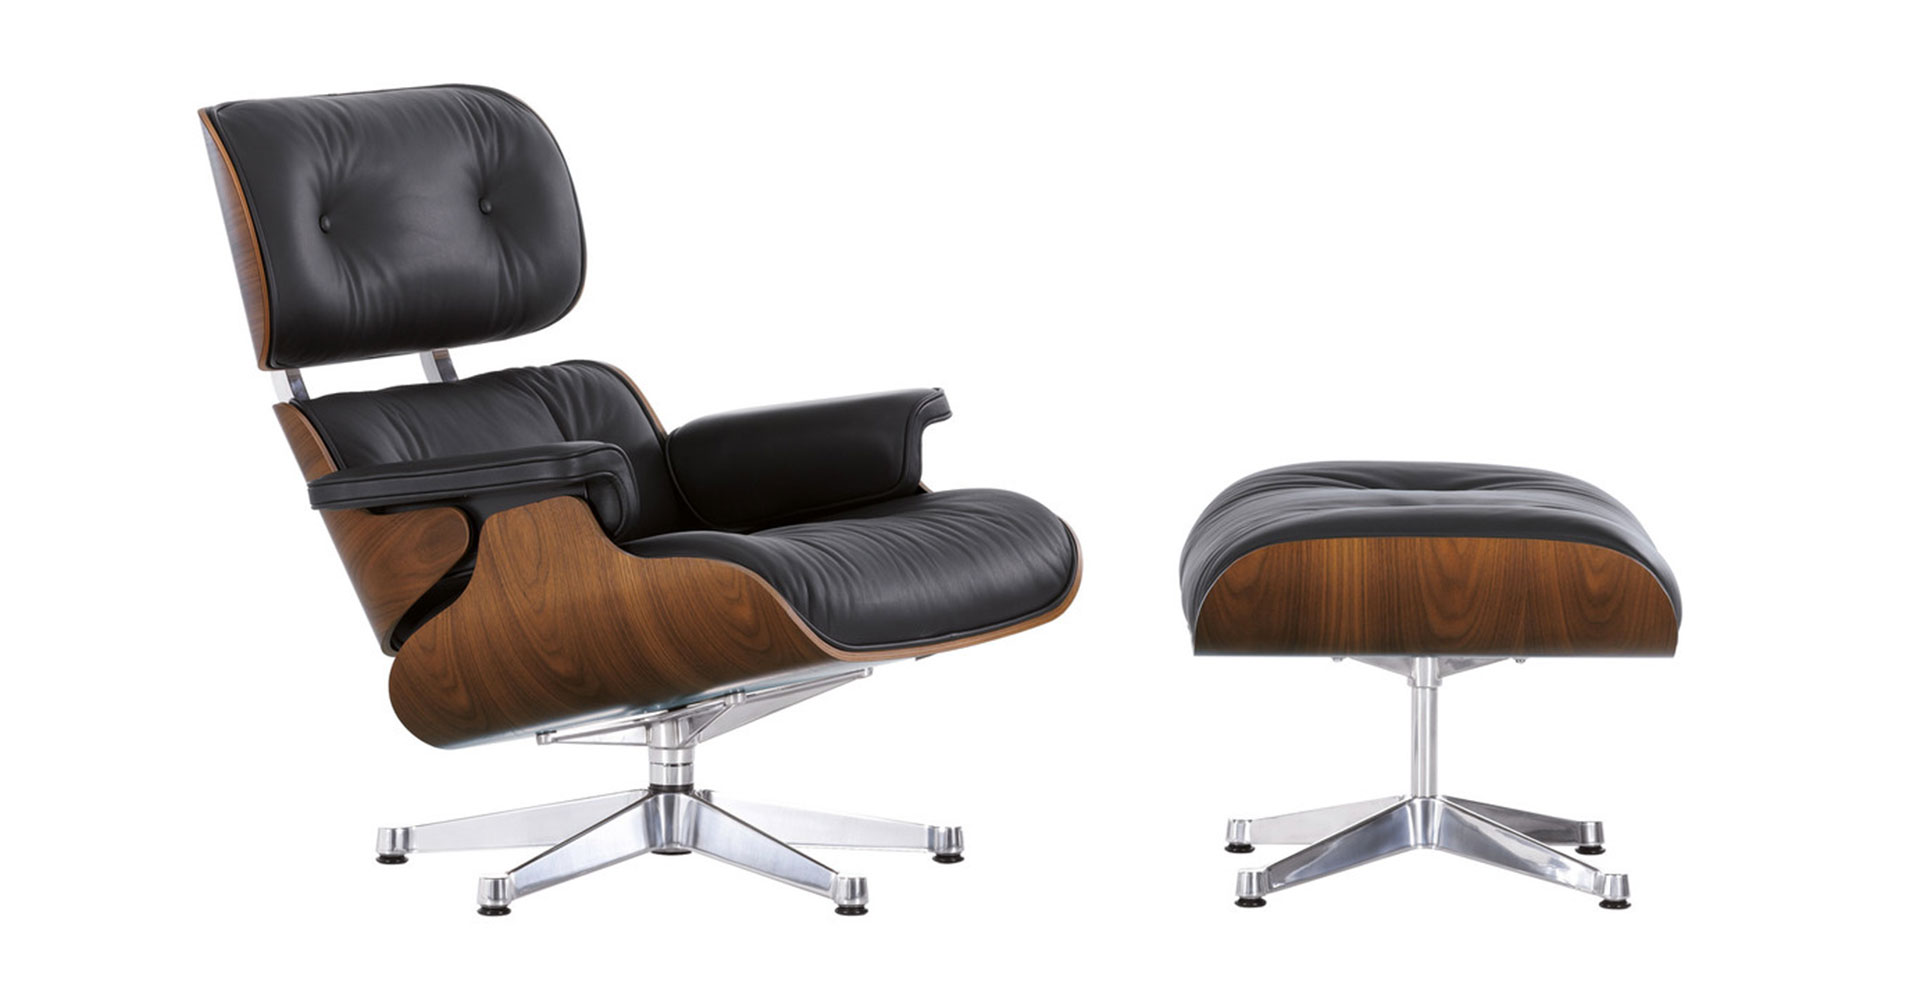 Armchair Eames Lounge Chair Vitra, Famous Leather Chair